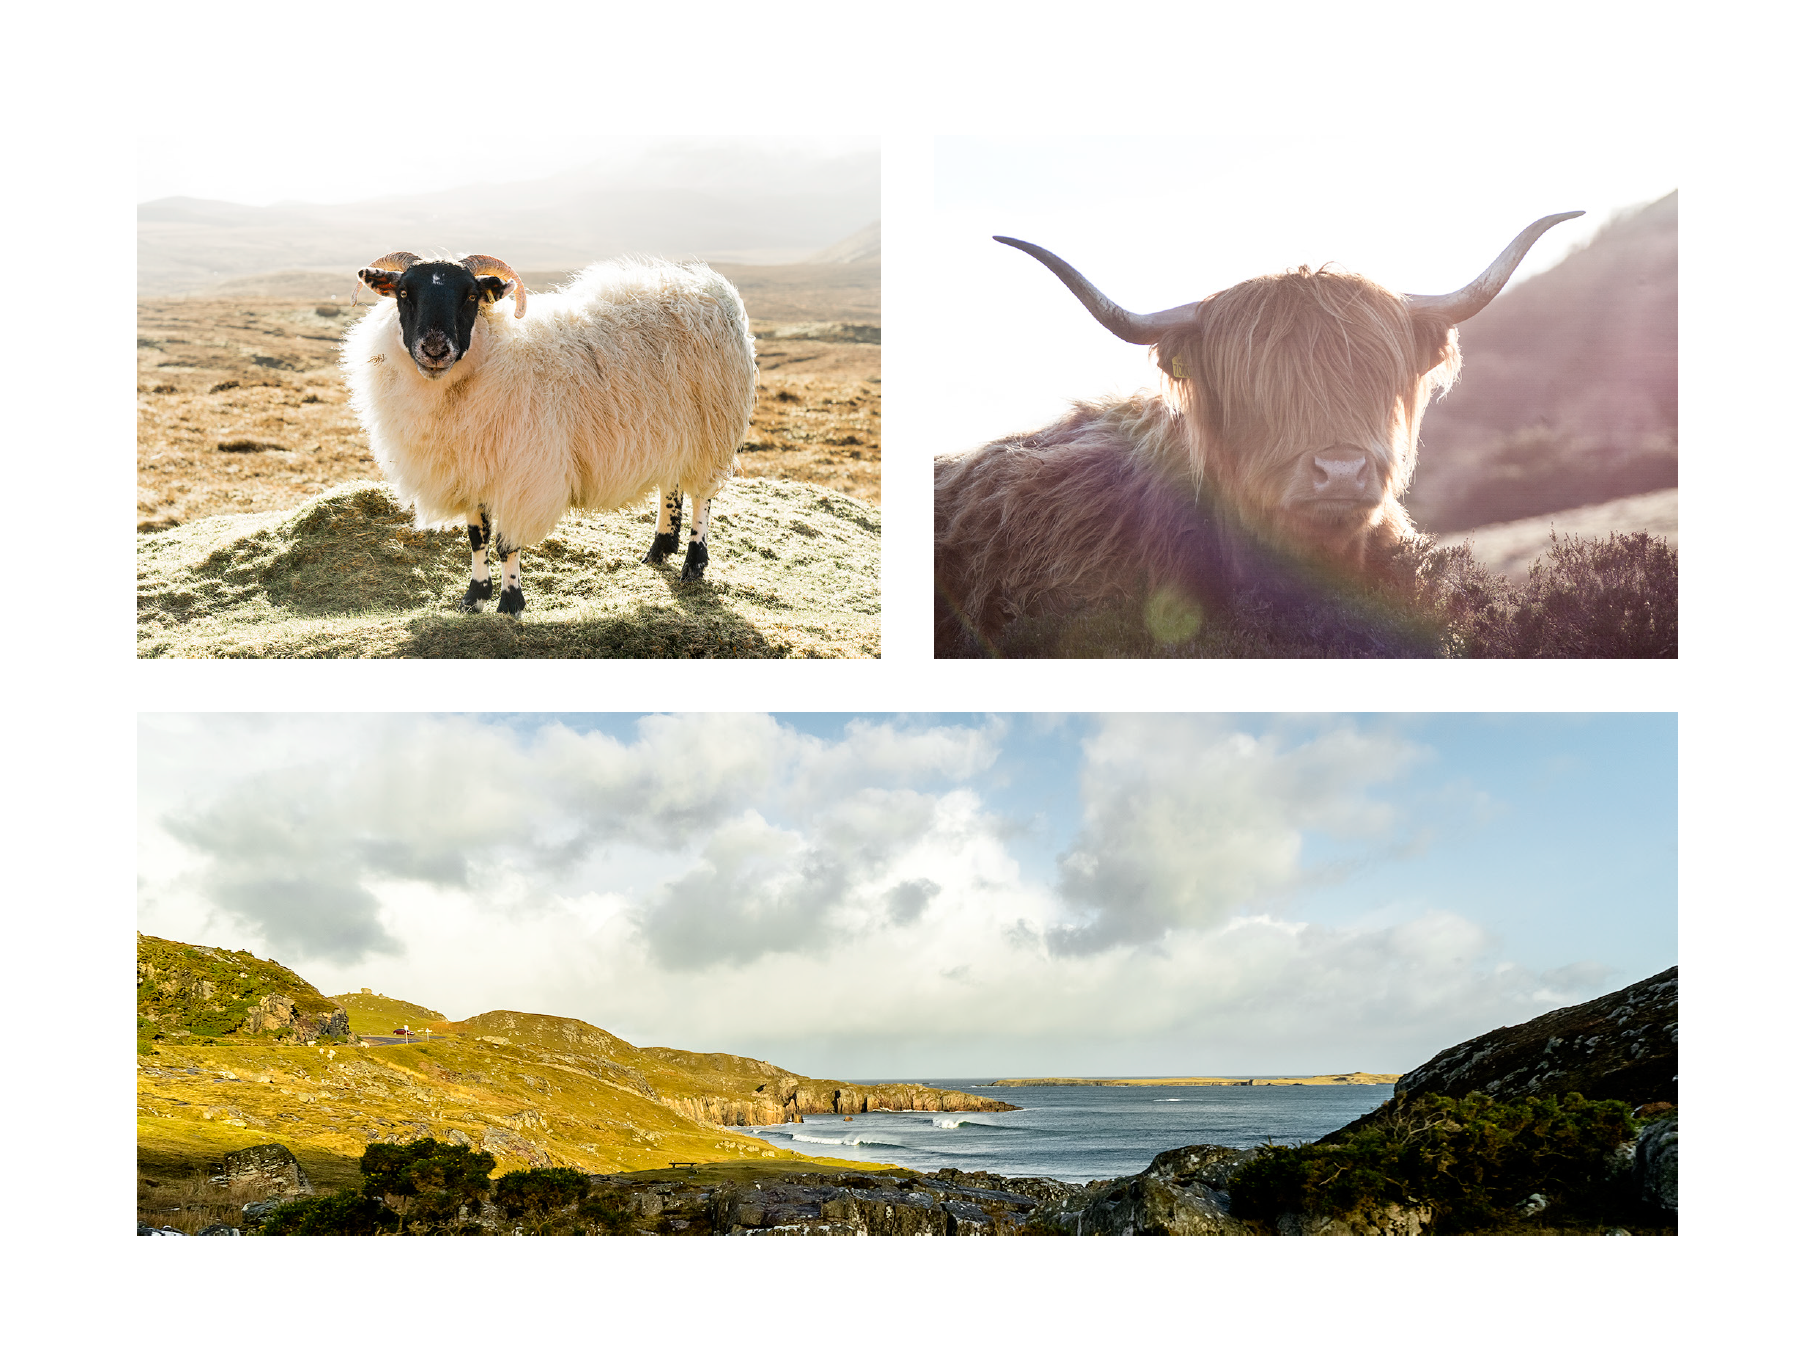 Alba- A photo book by Mark McInnis- Top left photo is a ram. Top right photo is a highland cow with large horns. Bottom photo is a line up rolling in.  